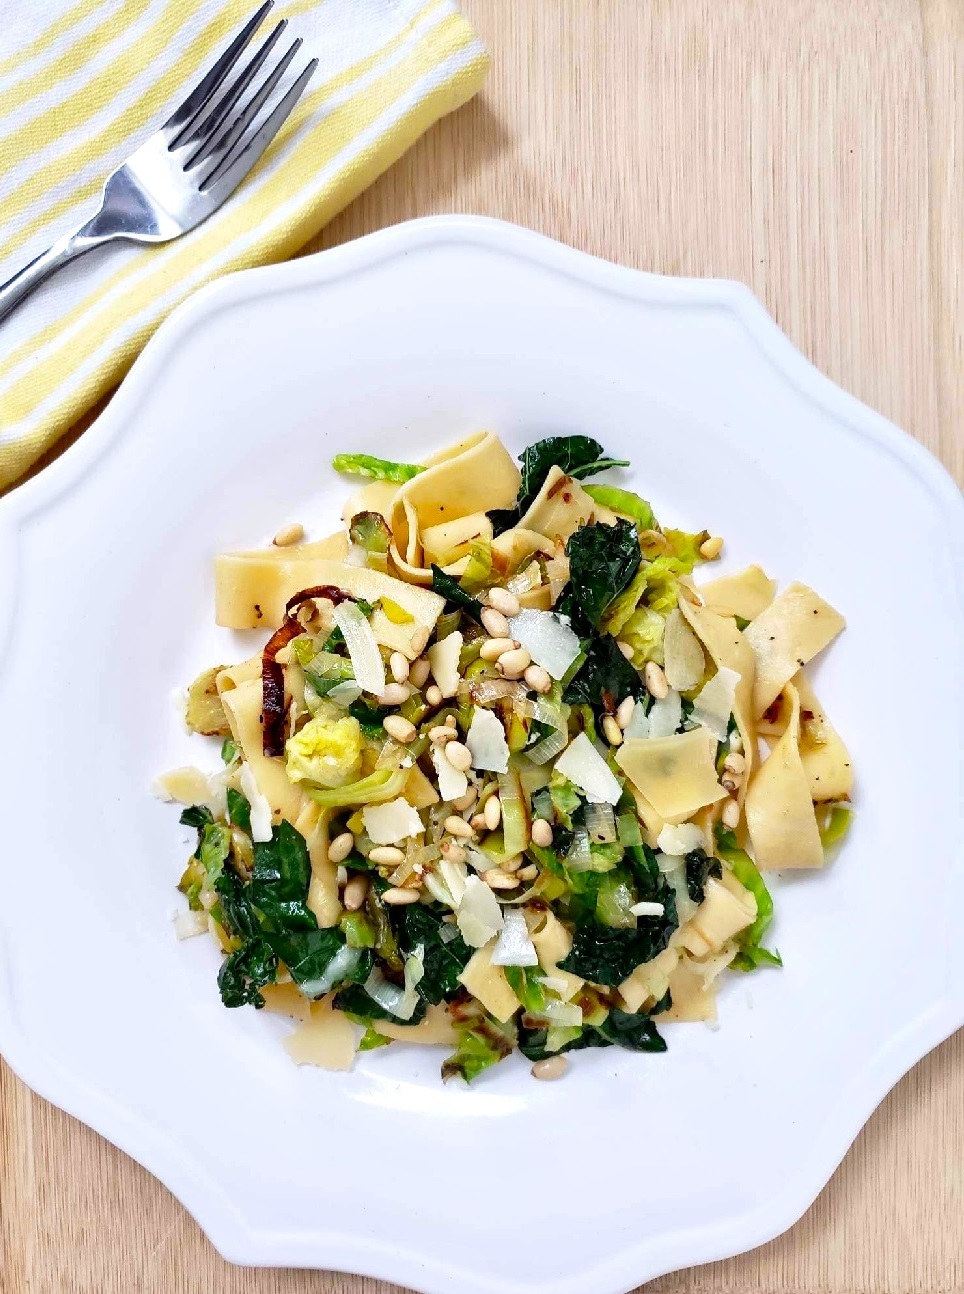 Lemon Leek Pasta with kale and brussels sprouts